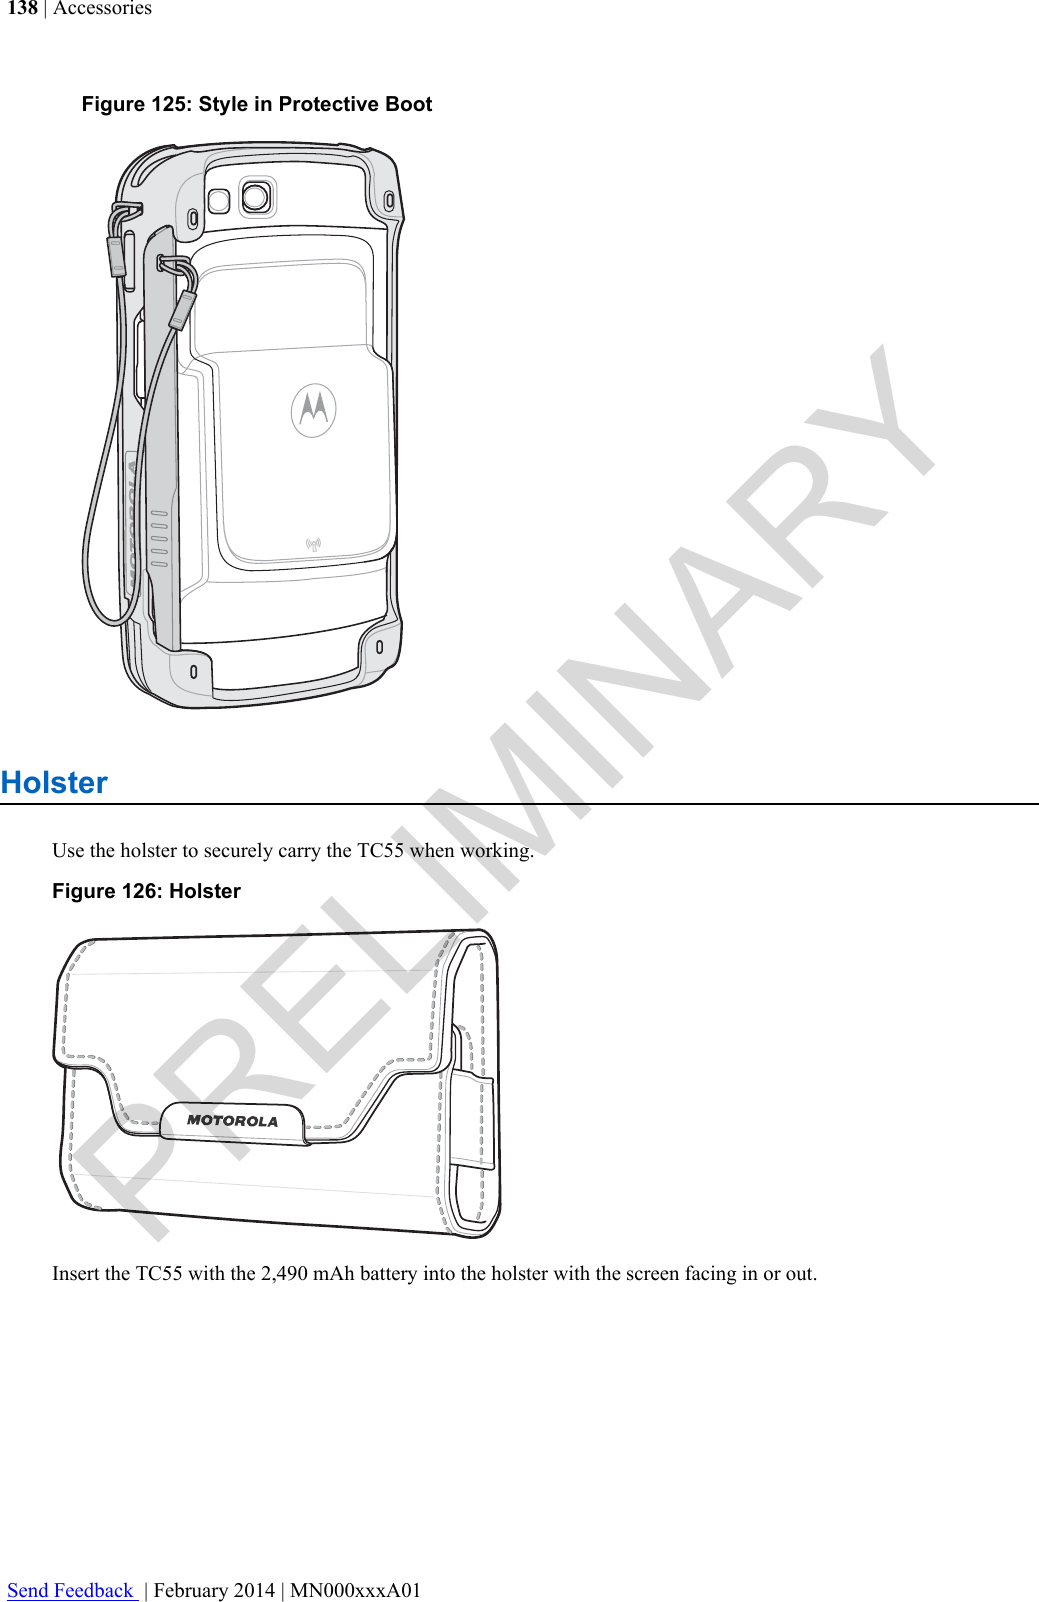 Figure 125: Style in Protective BootHolsterUse the holster to securely carry the TC55 when working.Figure 126: HolsterInsert the TC55 with the 2,490 mAh battery into the holster with the screen facing in or out.138 | AccessoriesSend Feedback  | February 2014 | MN000xxxA01PRELIMINARY